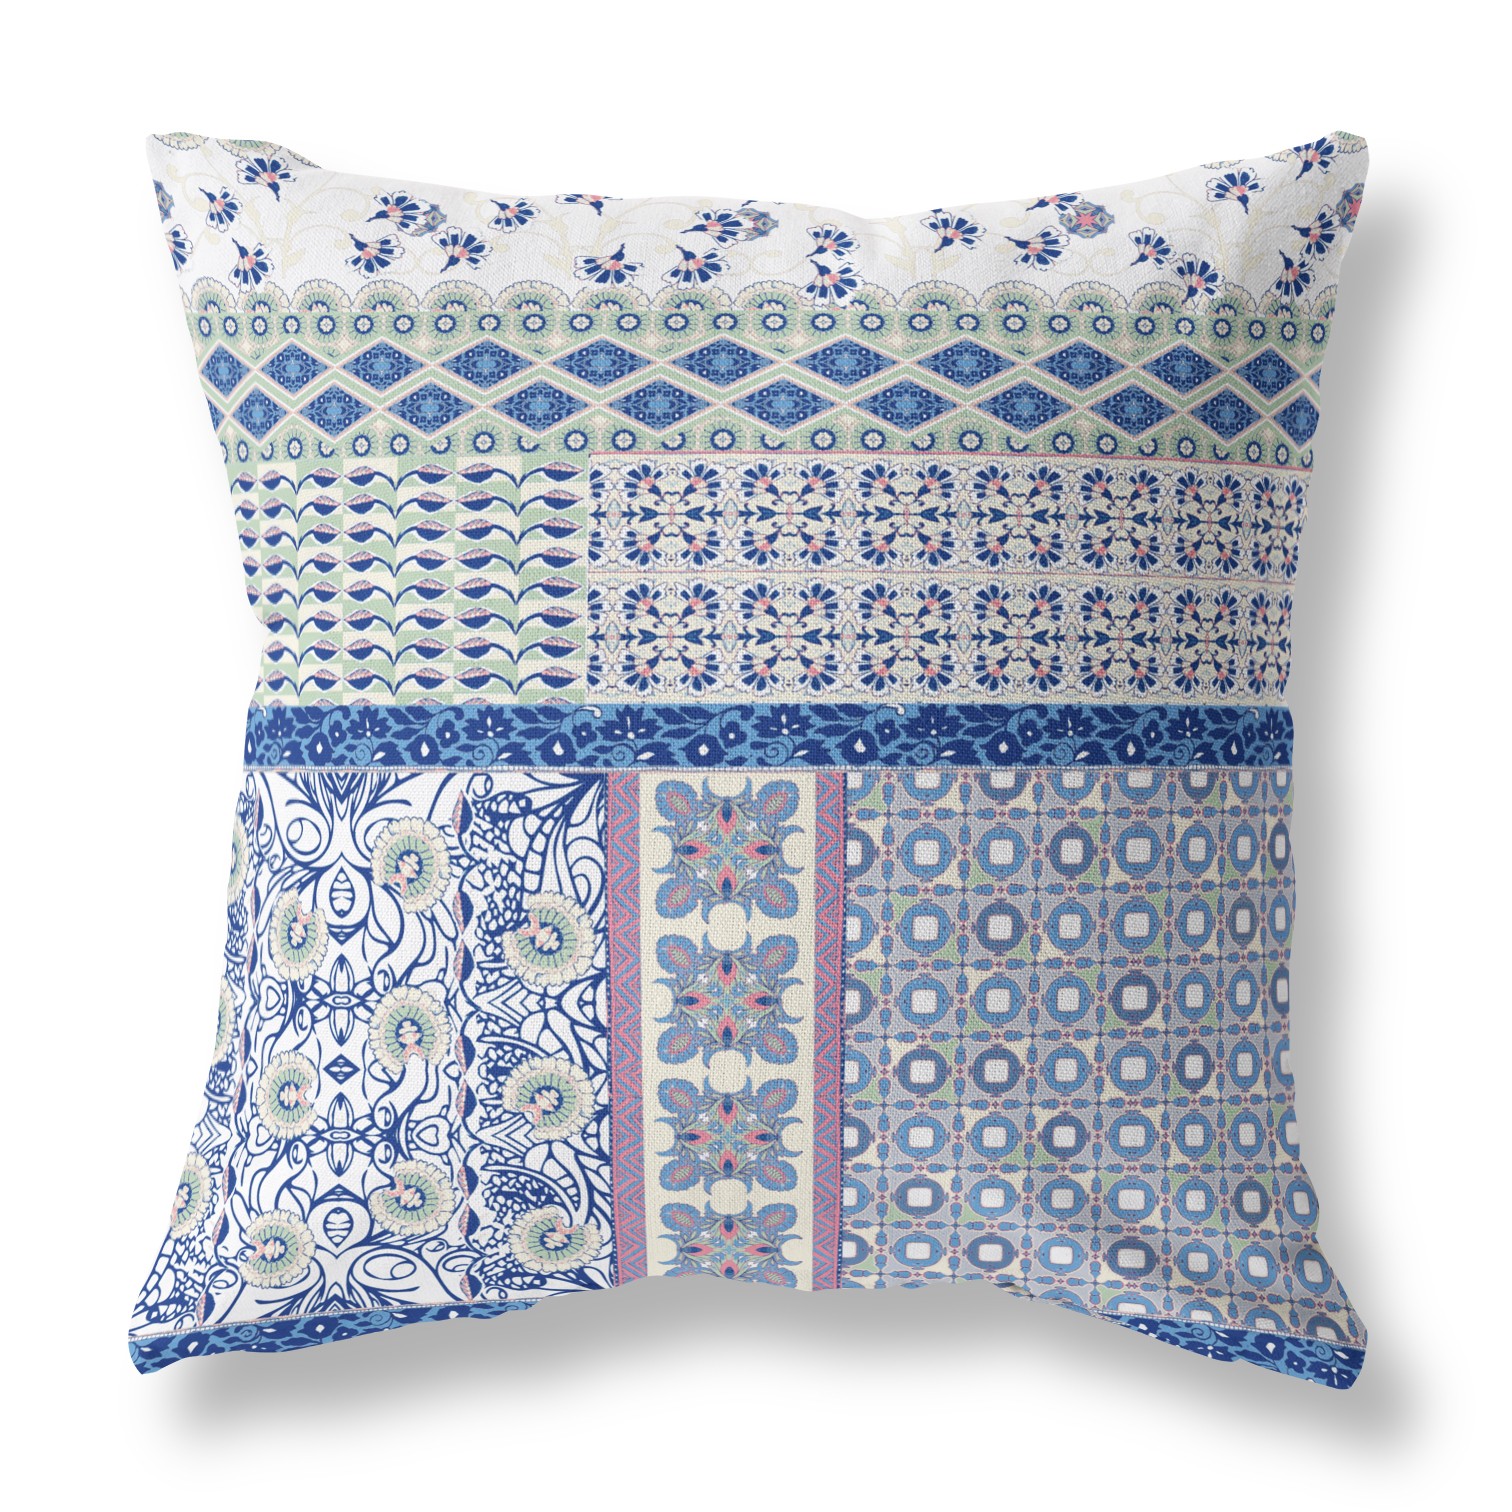 18” Blue Lavender White Patch Indoor Outdoor Zippered Throw Pillow-410951-1